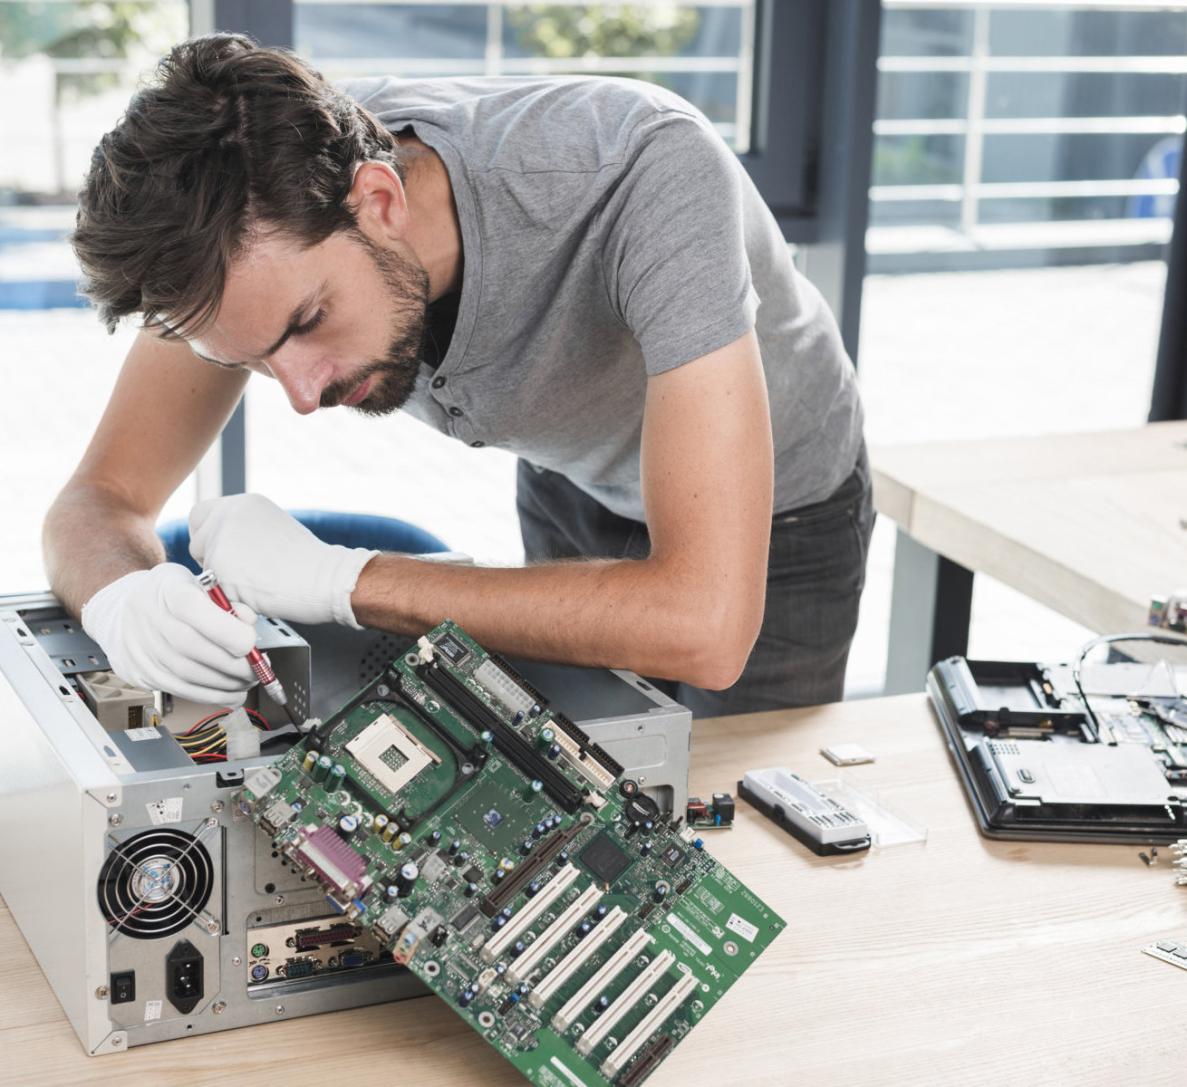 How Can I Market Myself as a Computer Repair Technician?